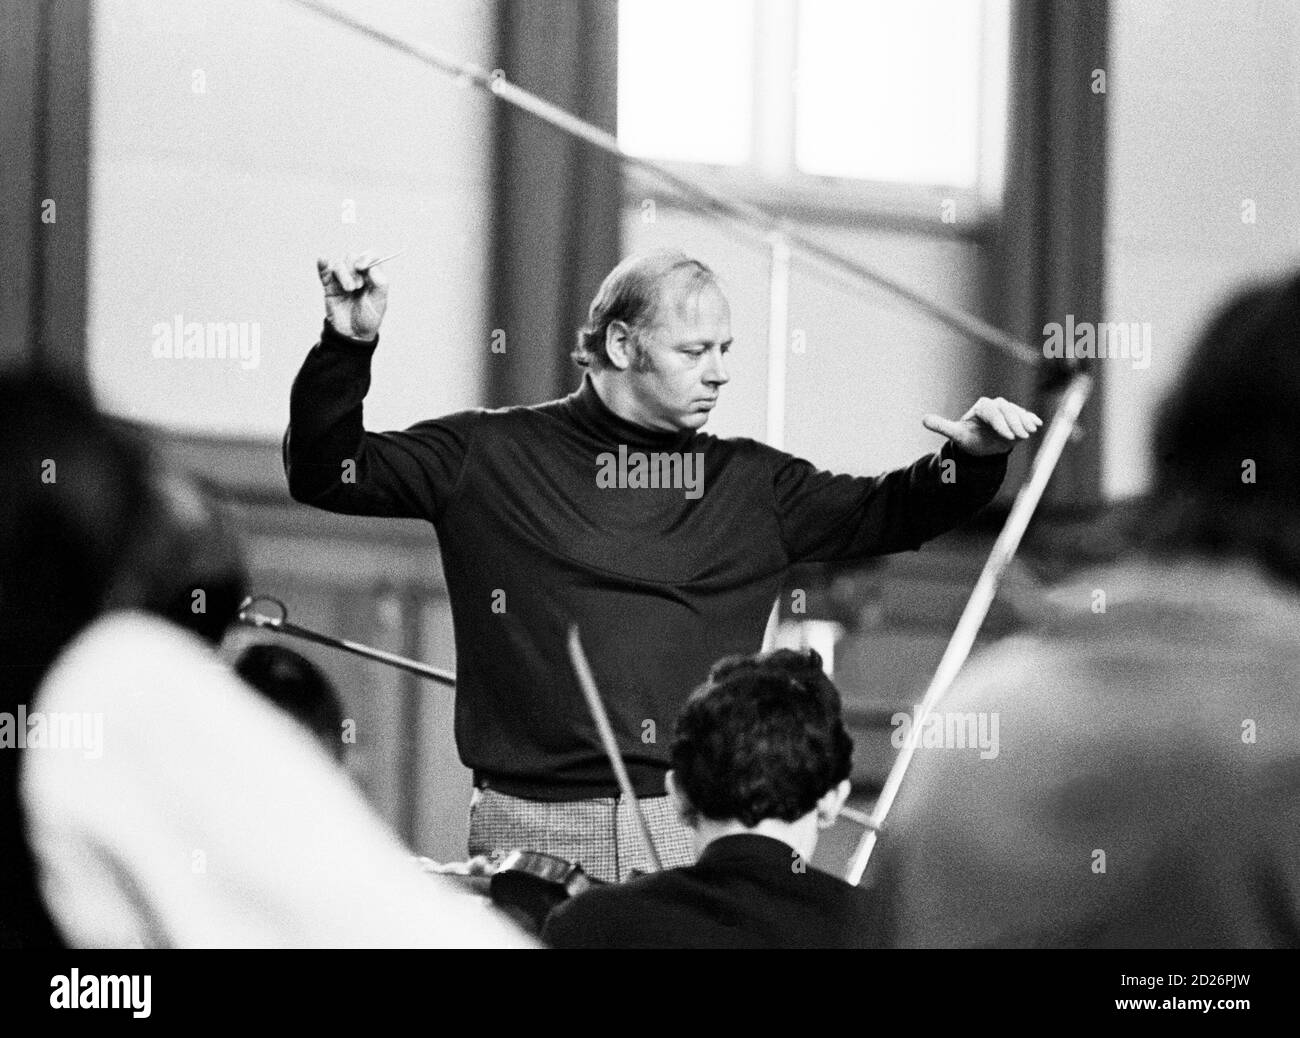 Bernard Haitink conducting a Philips recording session of the Liszt piano concertos with the London Philharmonic Orchestra (LPO) in the Assembly Hall at Walthamstow Town Hall, Walthamstow, London in May 1972 Stock Photo